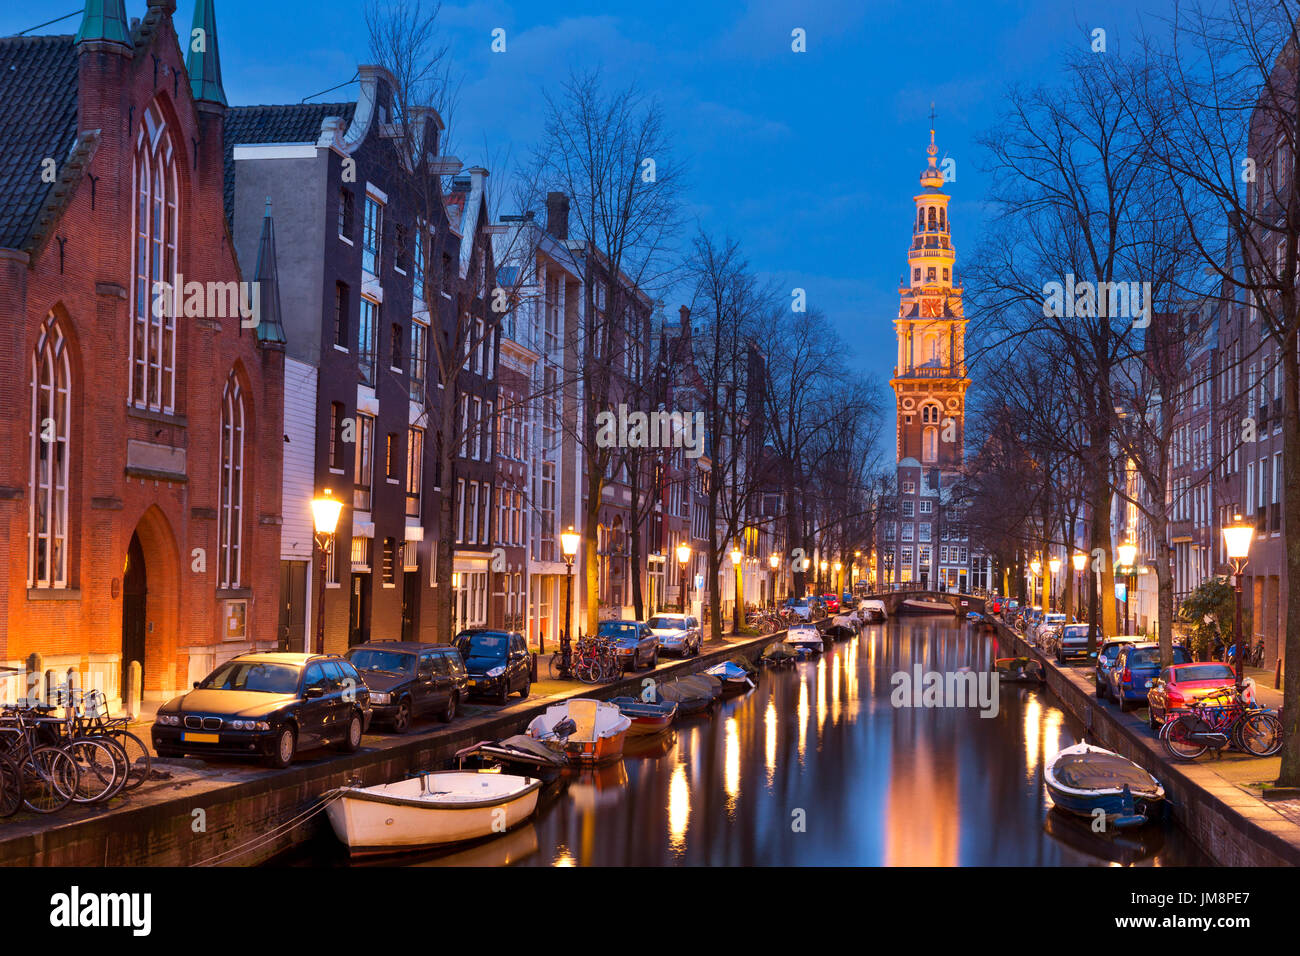 A church tower at the end of a canal in the city of Amsterdam, The Netherlands at night. Stock Photo